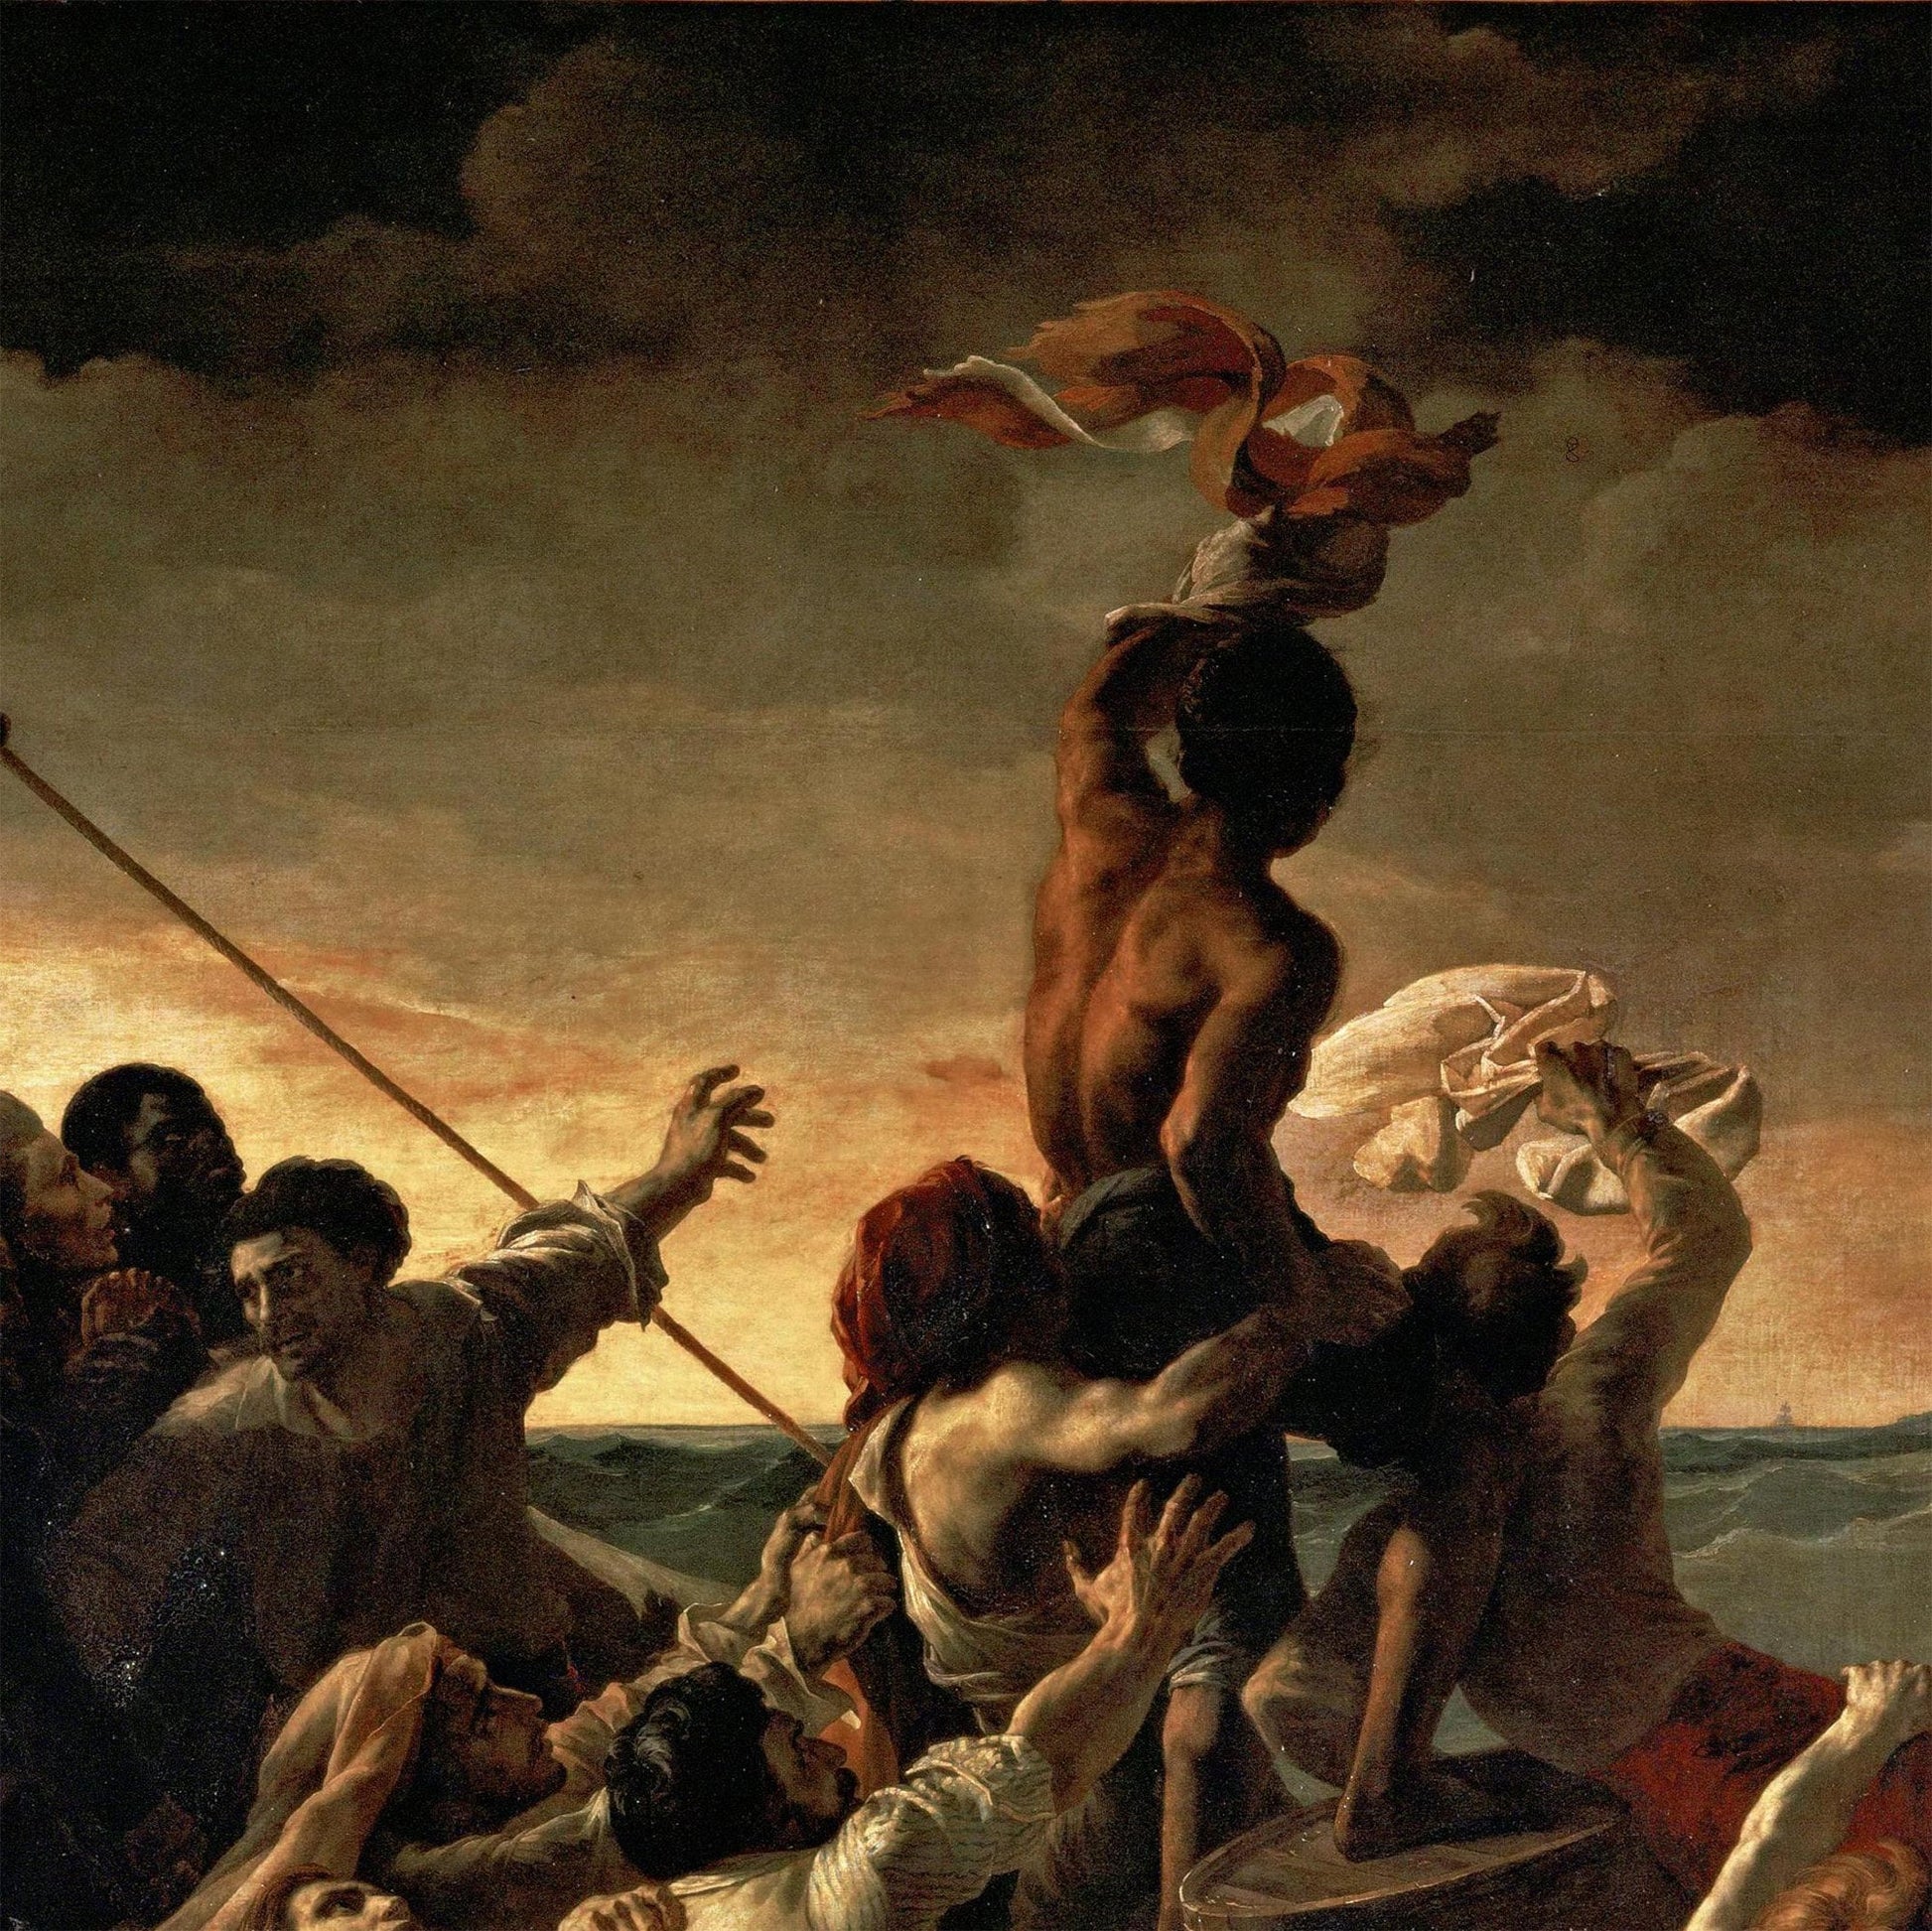 The Raft of the Medusa by Théodore Géricault, 3d Printed with texture and brush strokes looks like original oil-painting, code:484